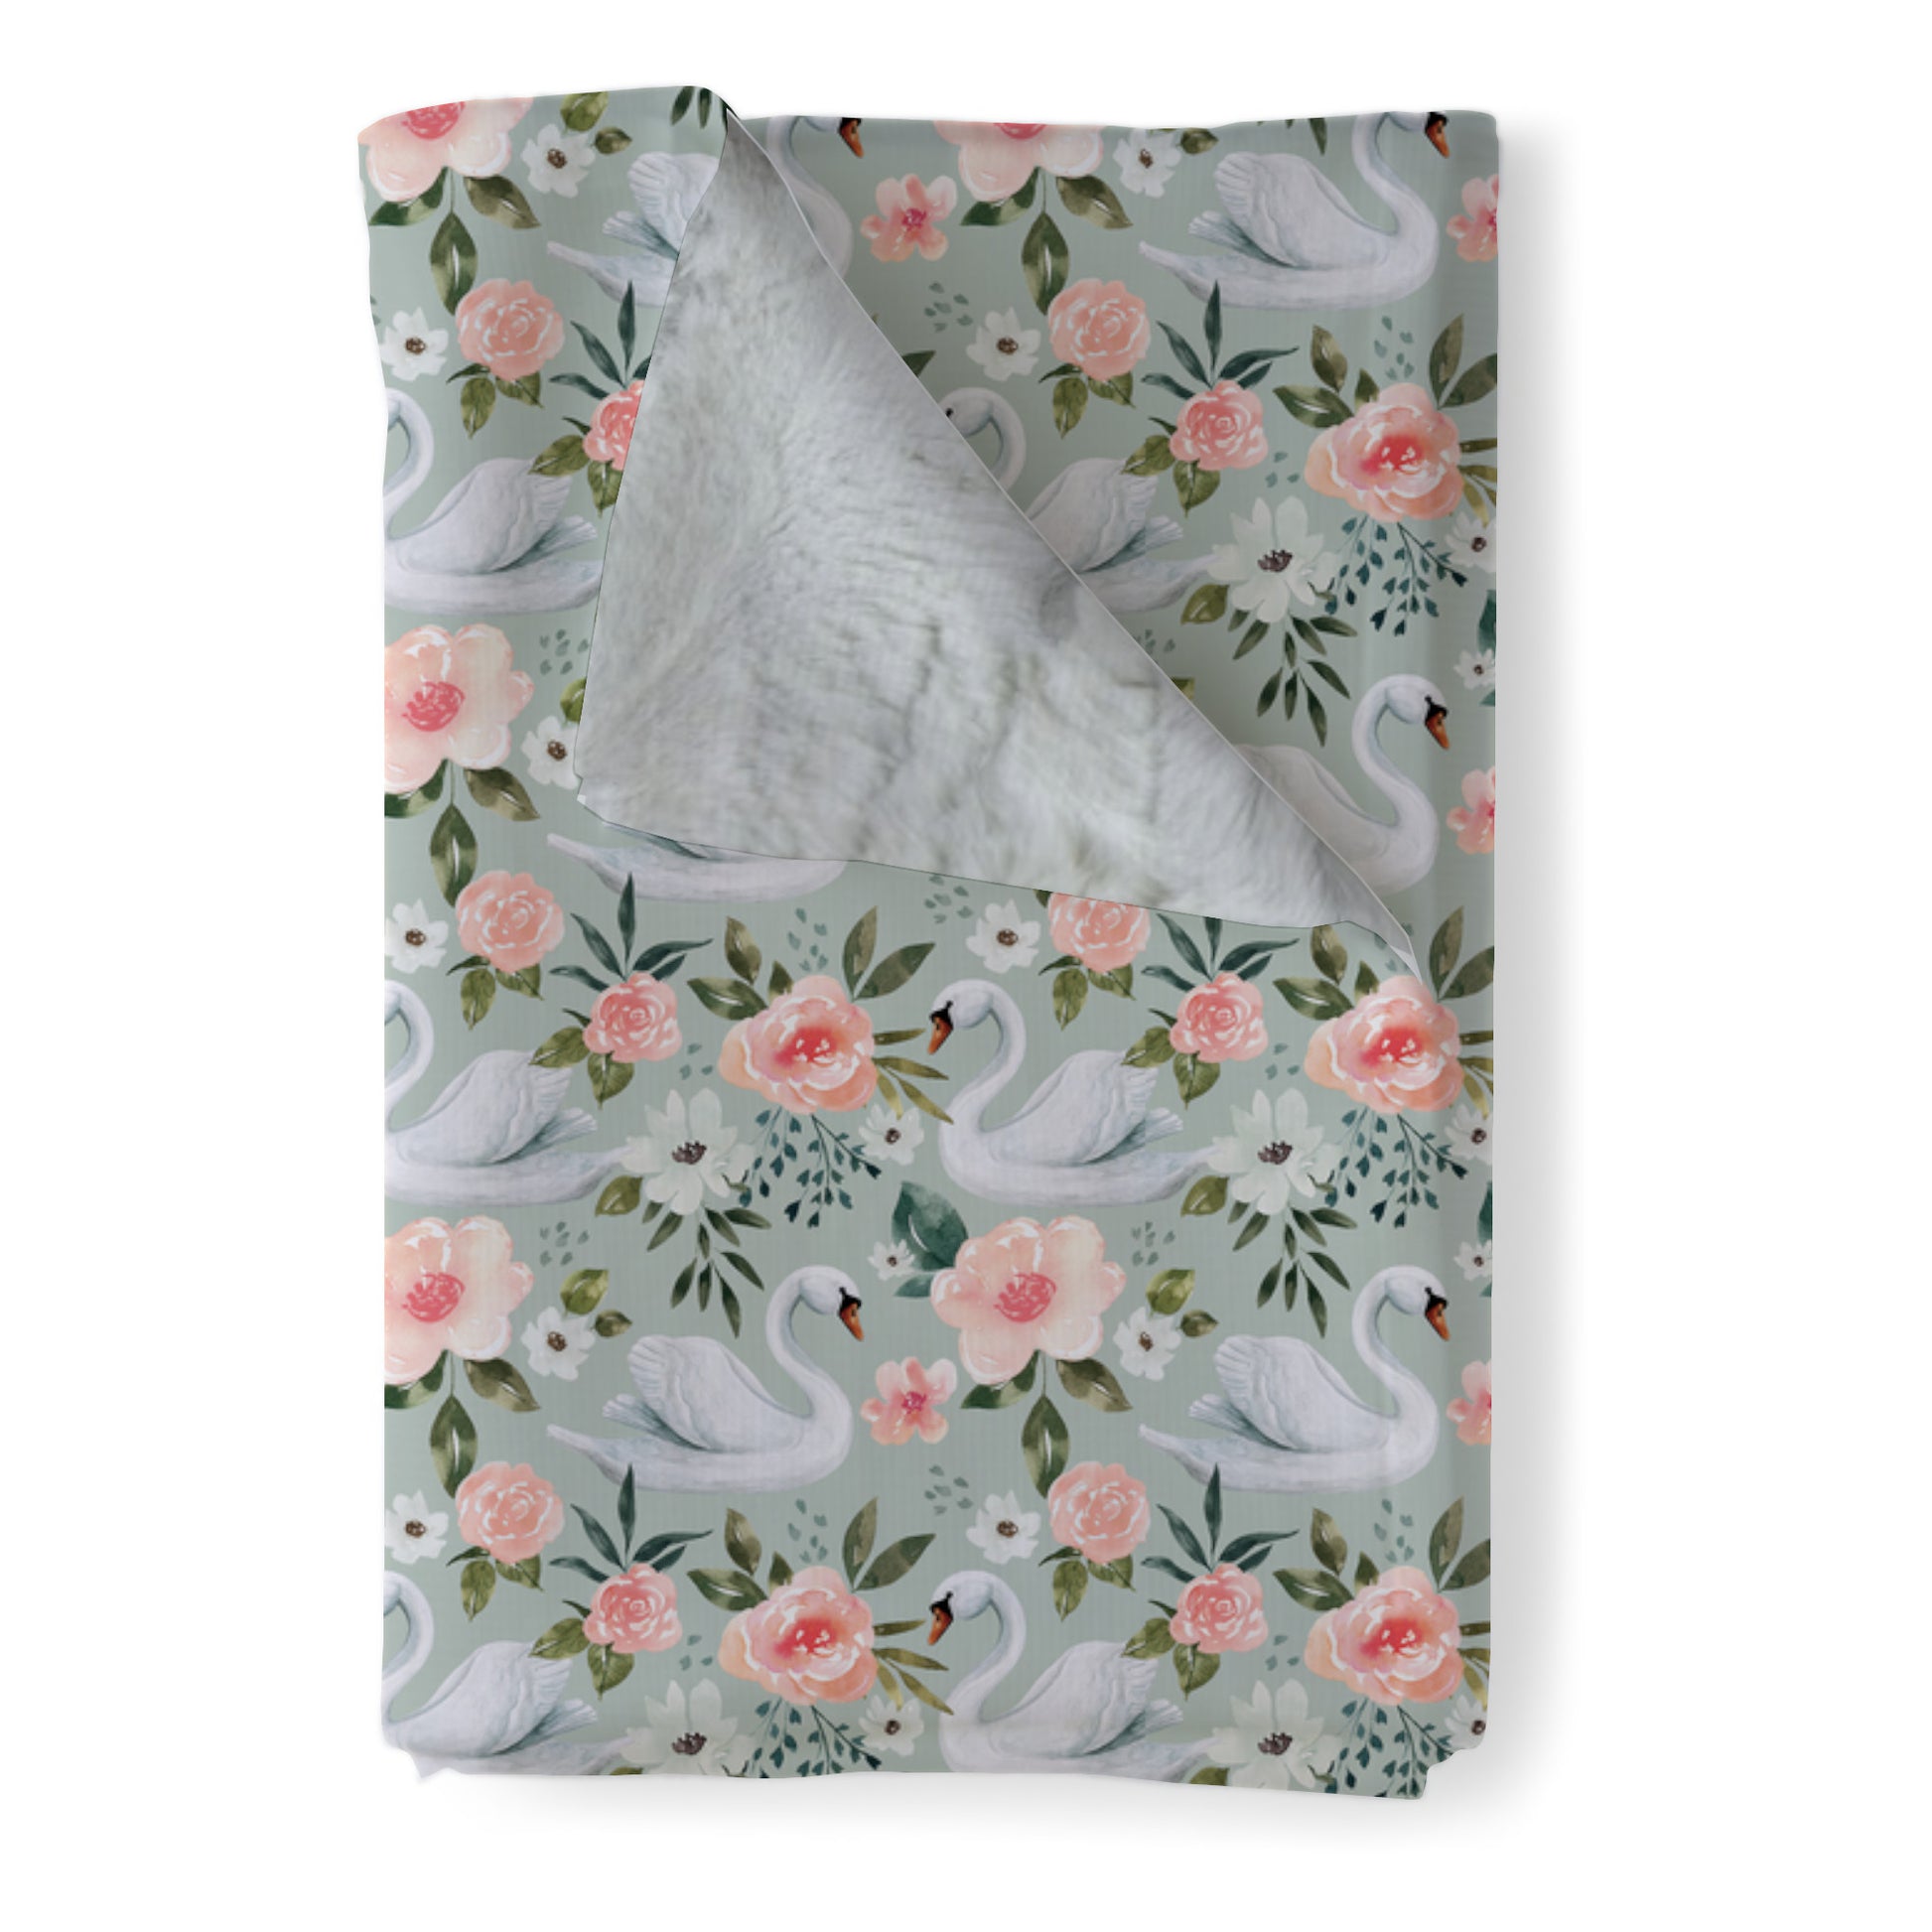 Swan Baby Blanket in Mint with Natural minky backing, available in lovey, baby, and toddler sizes. White swans surrounded by pale pink, and dusty pink flowers on a mint background.